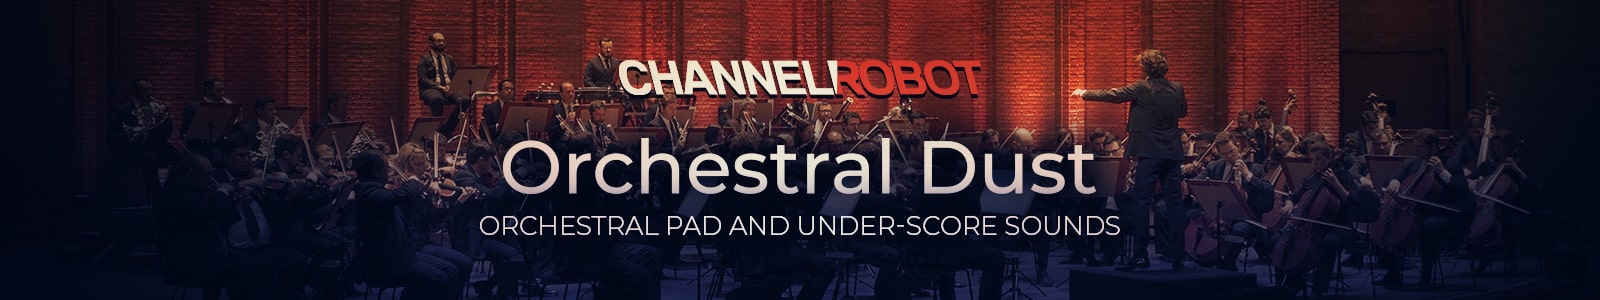 header Orchestral Dust By Channel Robot